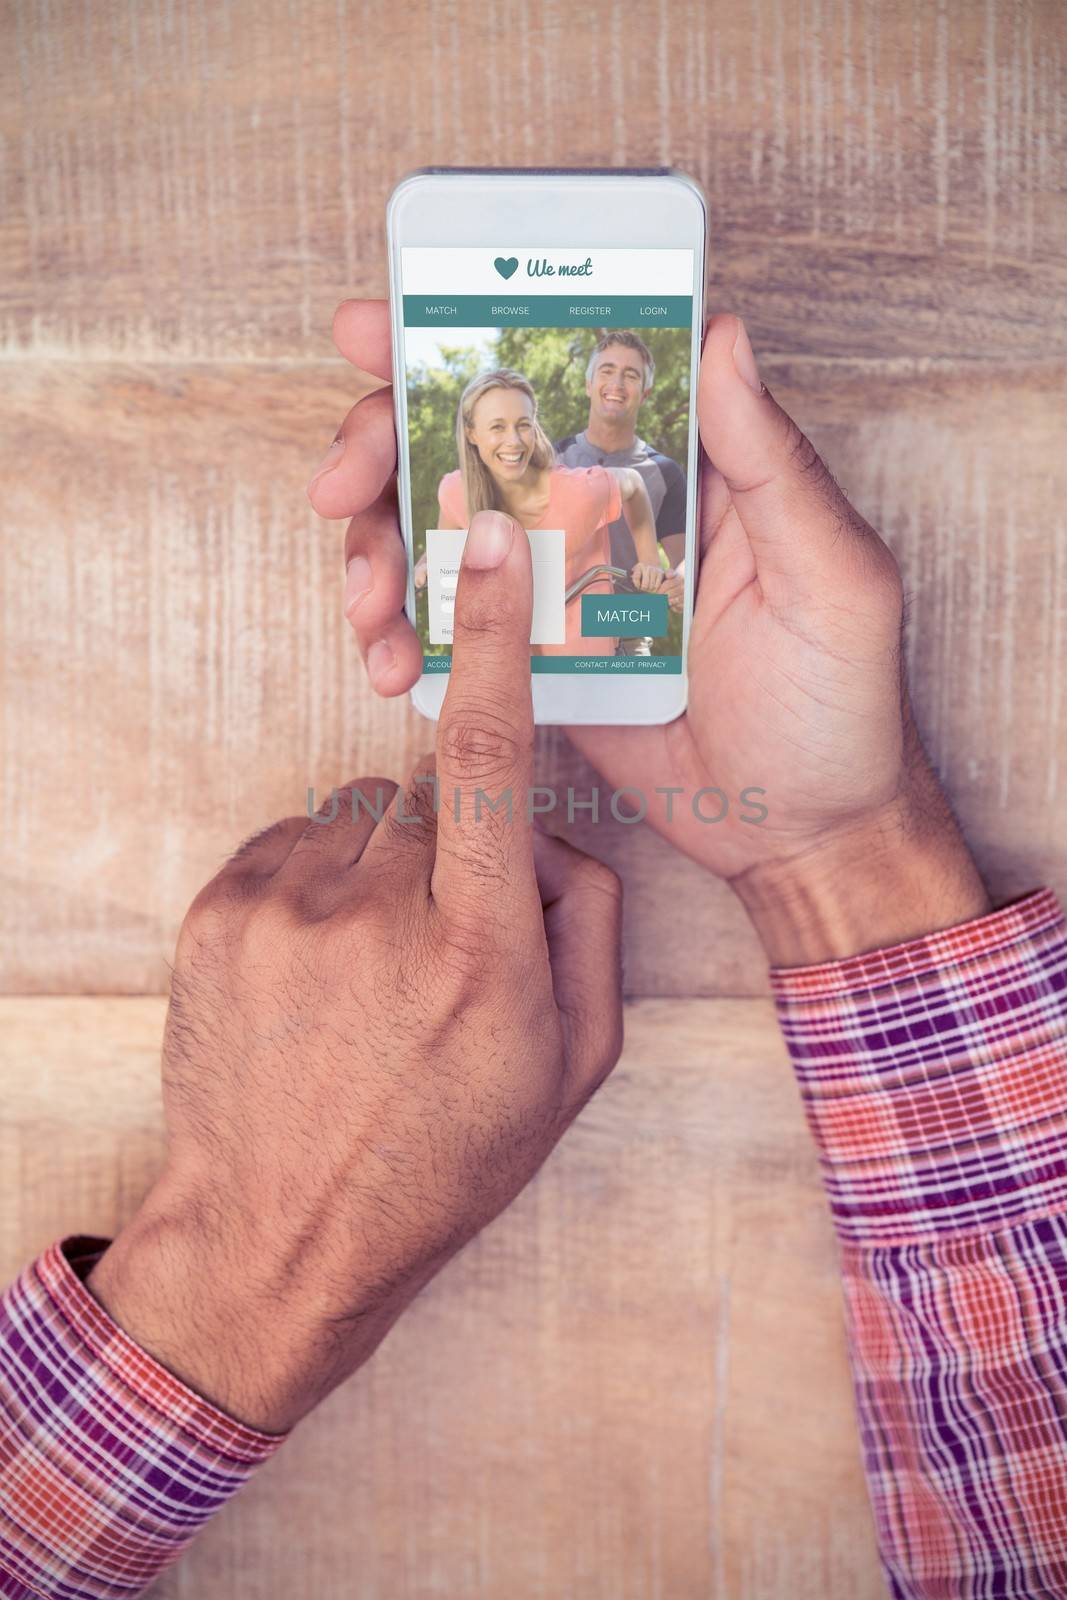 Online dating app against man touching screen of phone